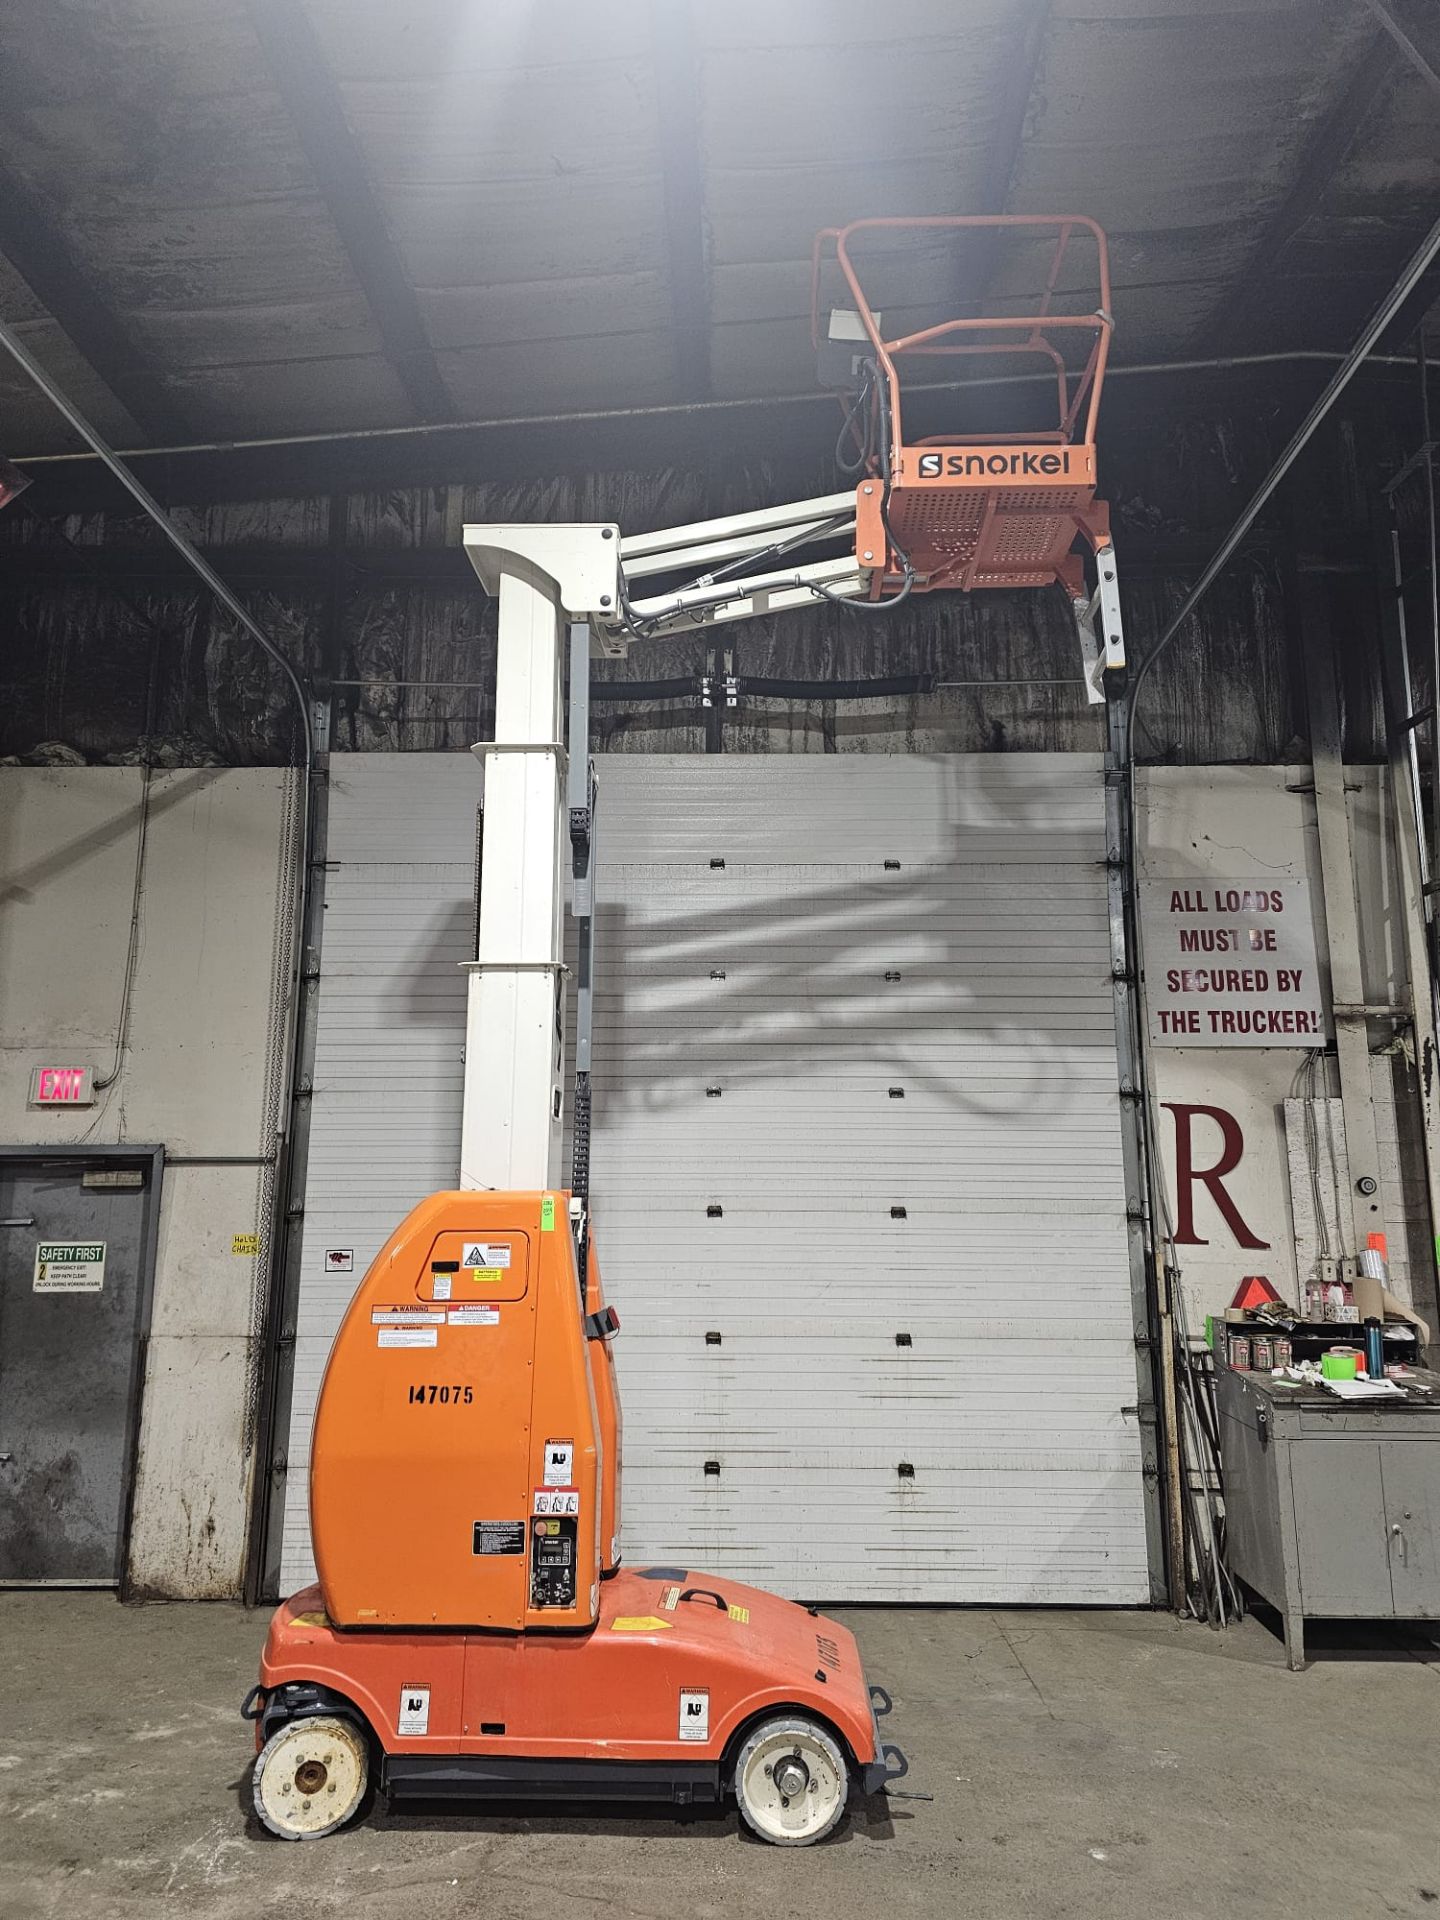 2019 Snorkel Model MB20J Mast Boom Lift Unit ManLift with 26' Working Height 24V Indoor Non- - Image 6 of 11